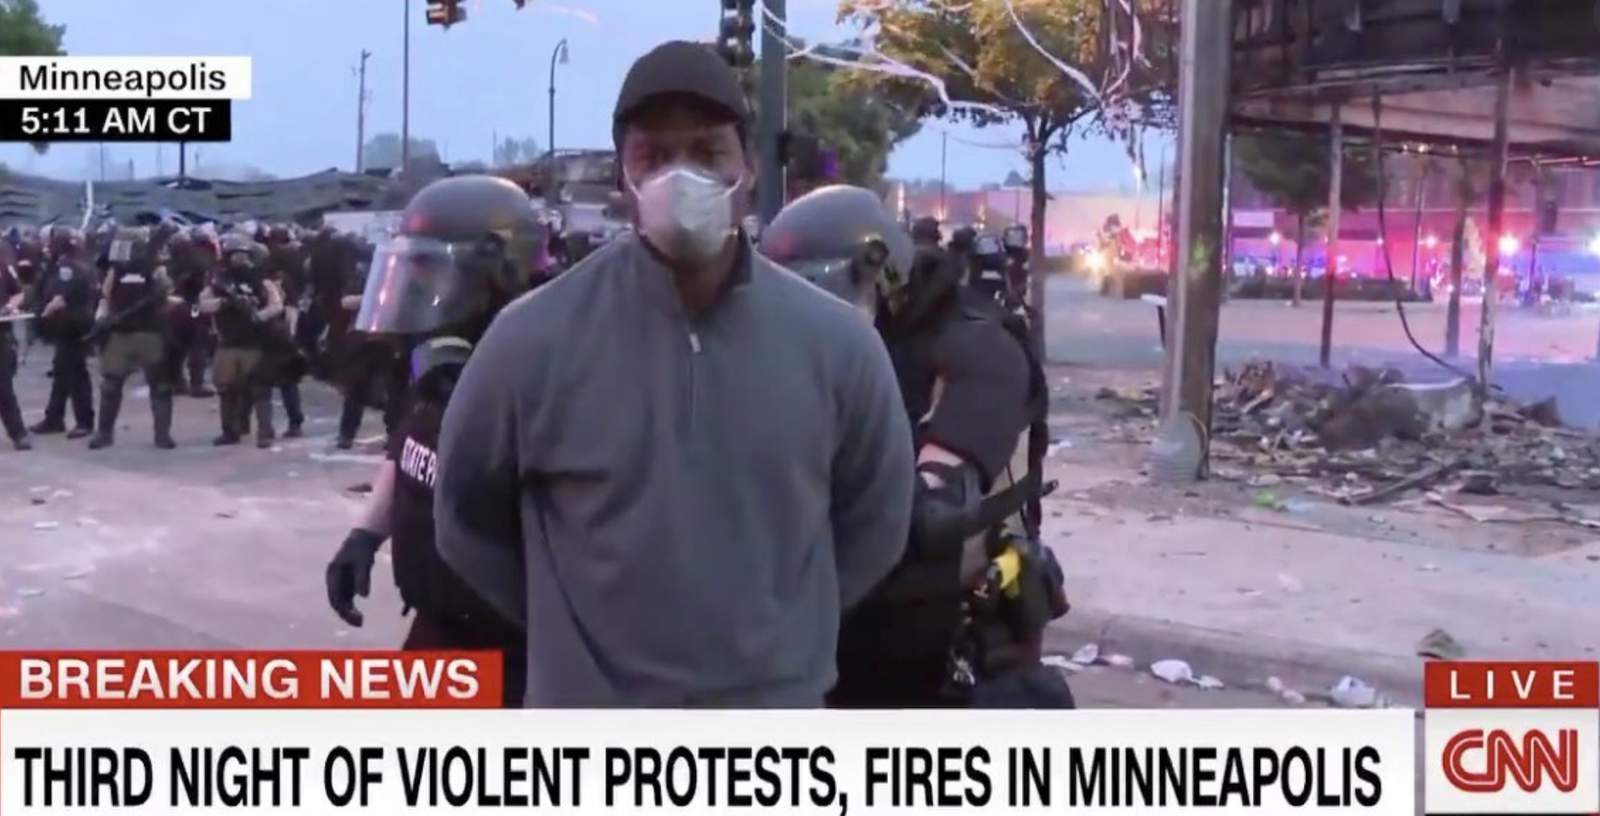 Army veteran and CNN photojournalist arrested while covering riots